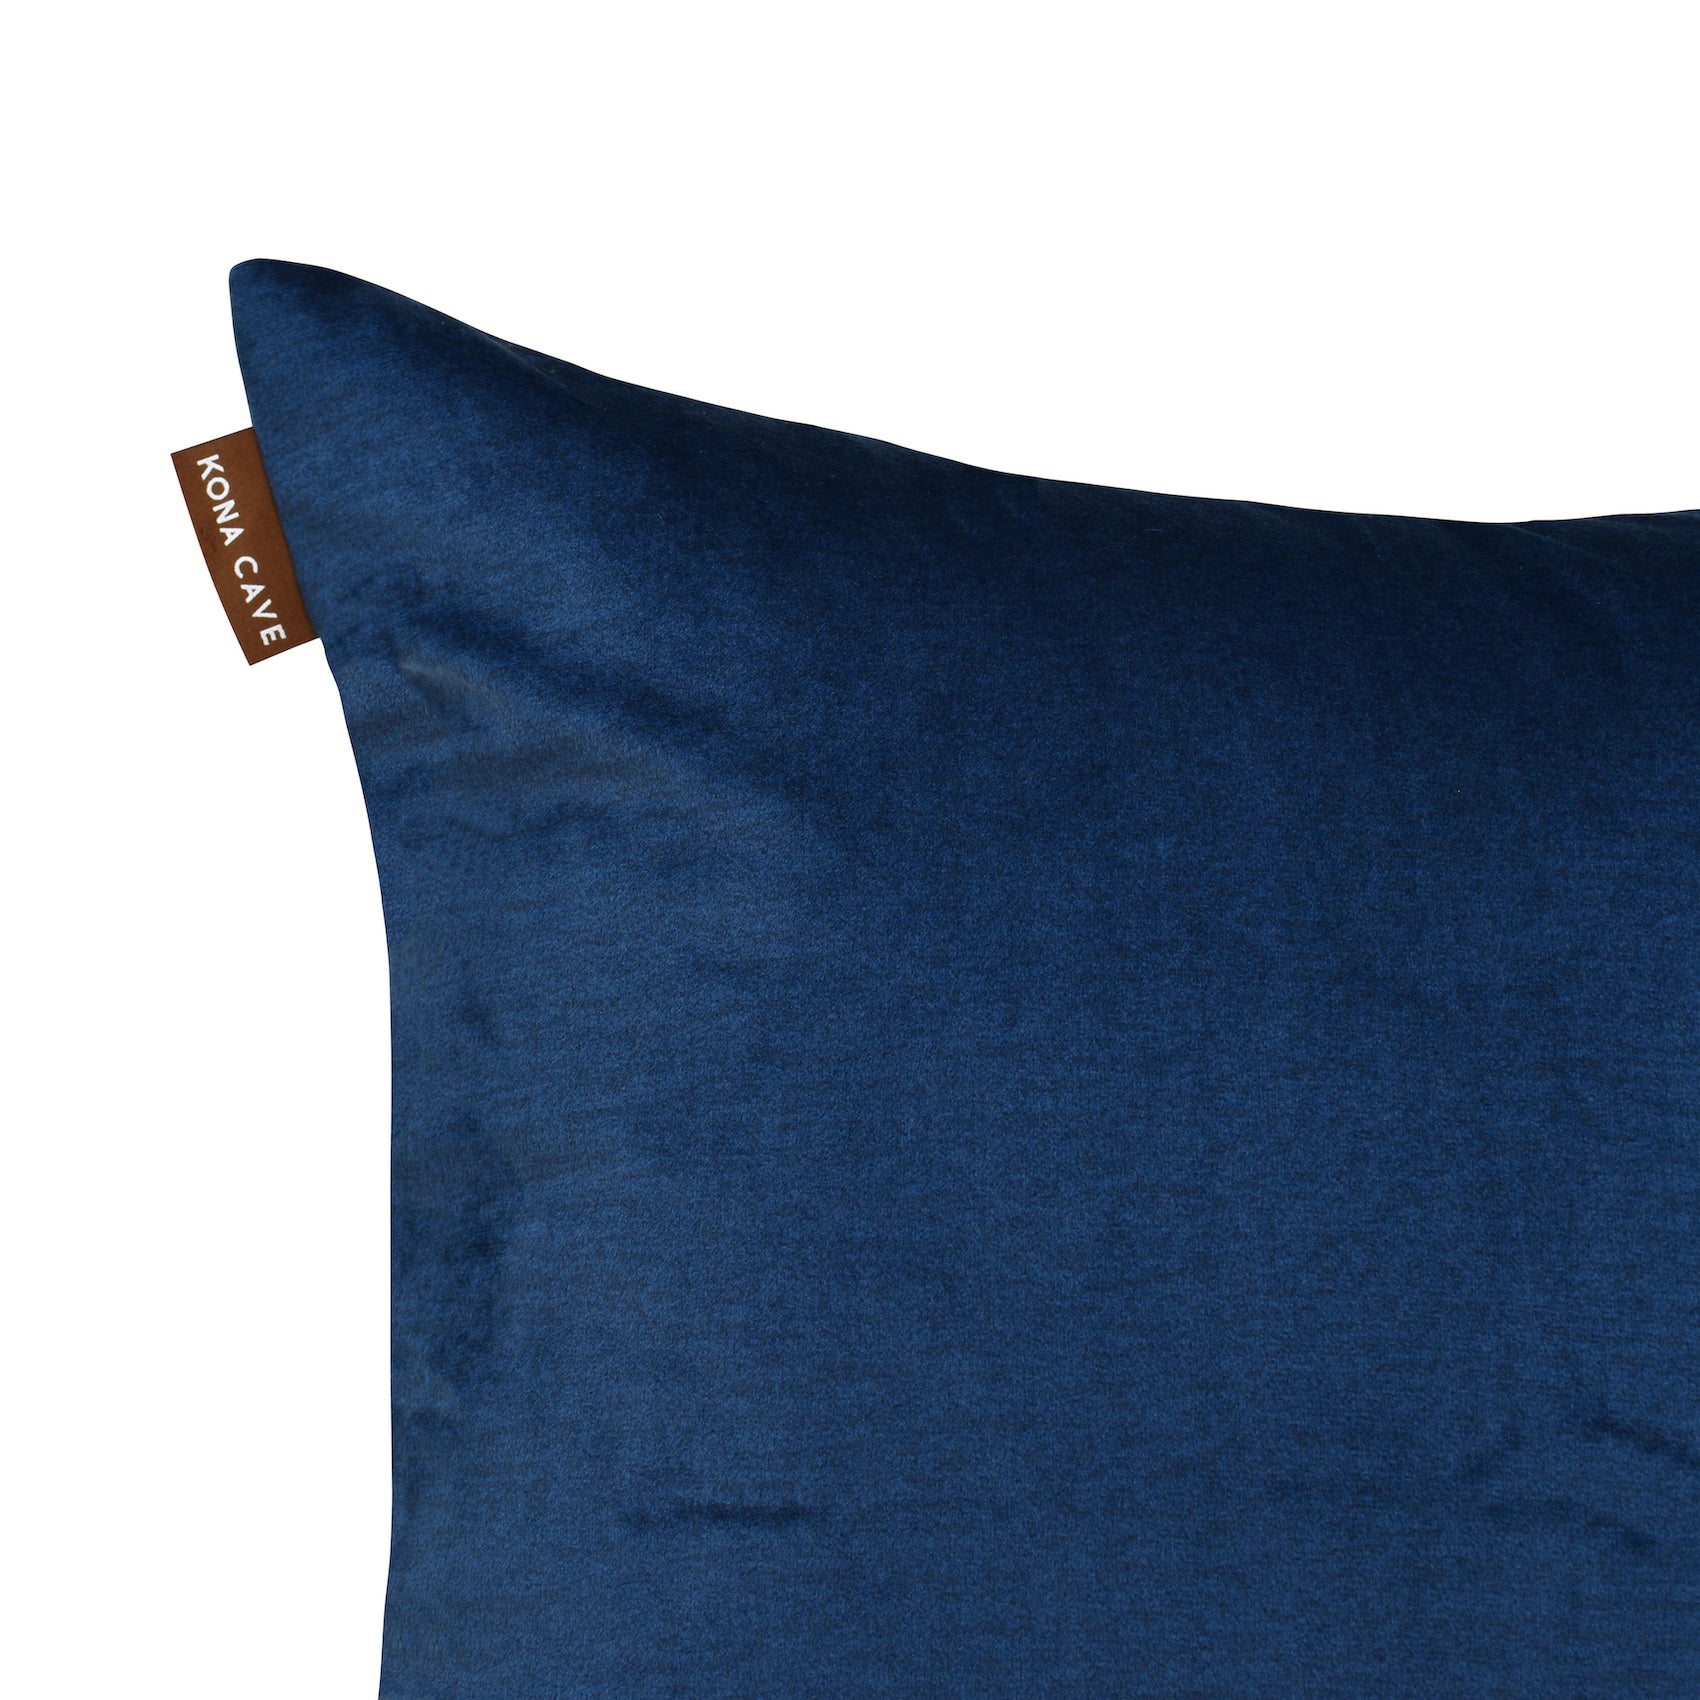 KONA CAVE® luxury pillow cover in deep midnight blue velvet. High-quality, washable, made in the EU.